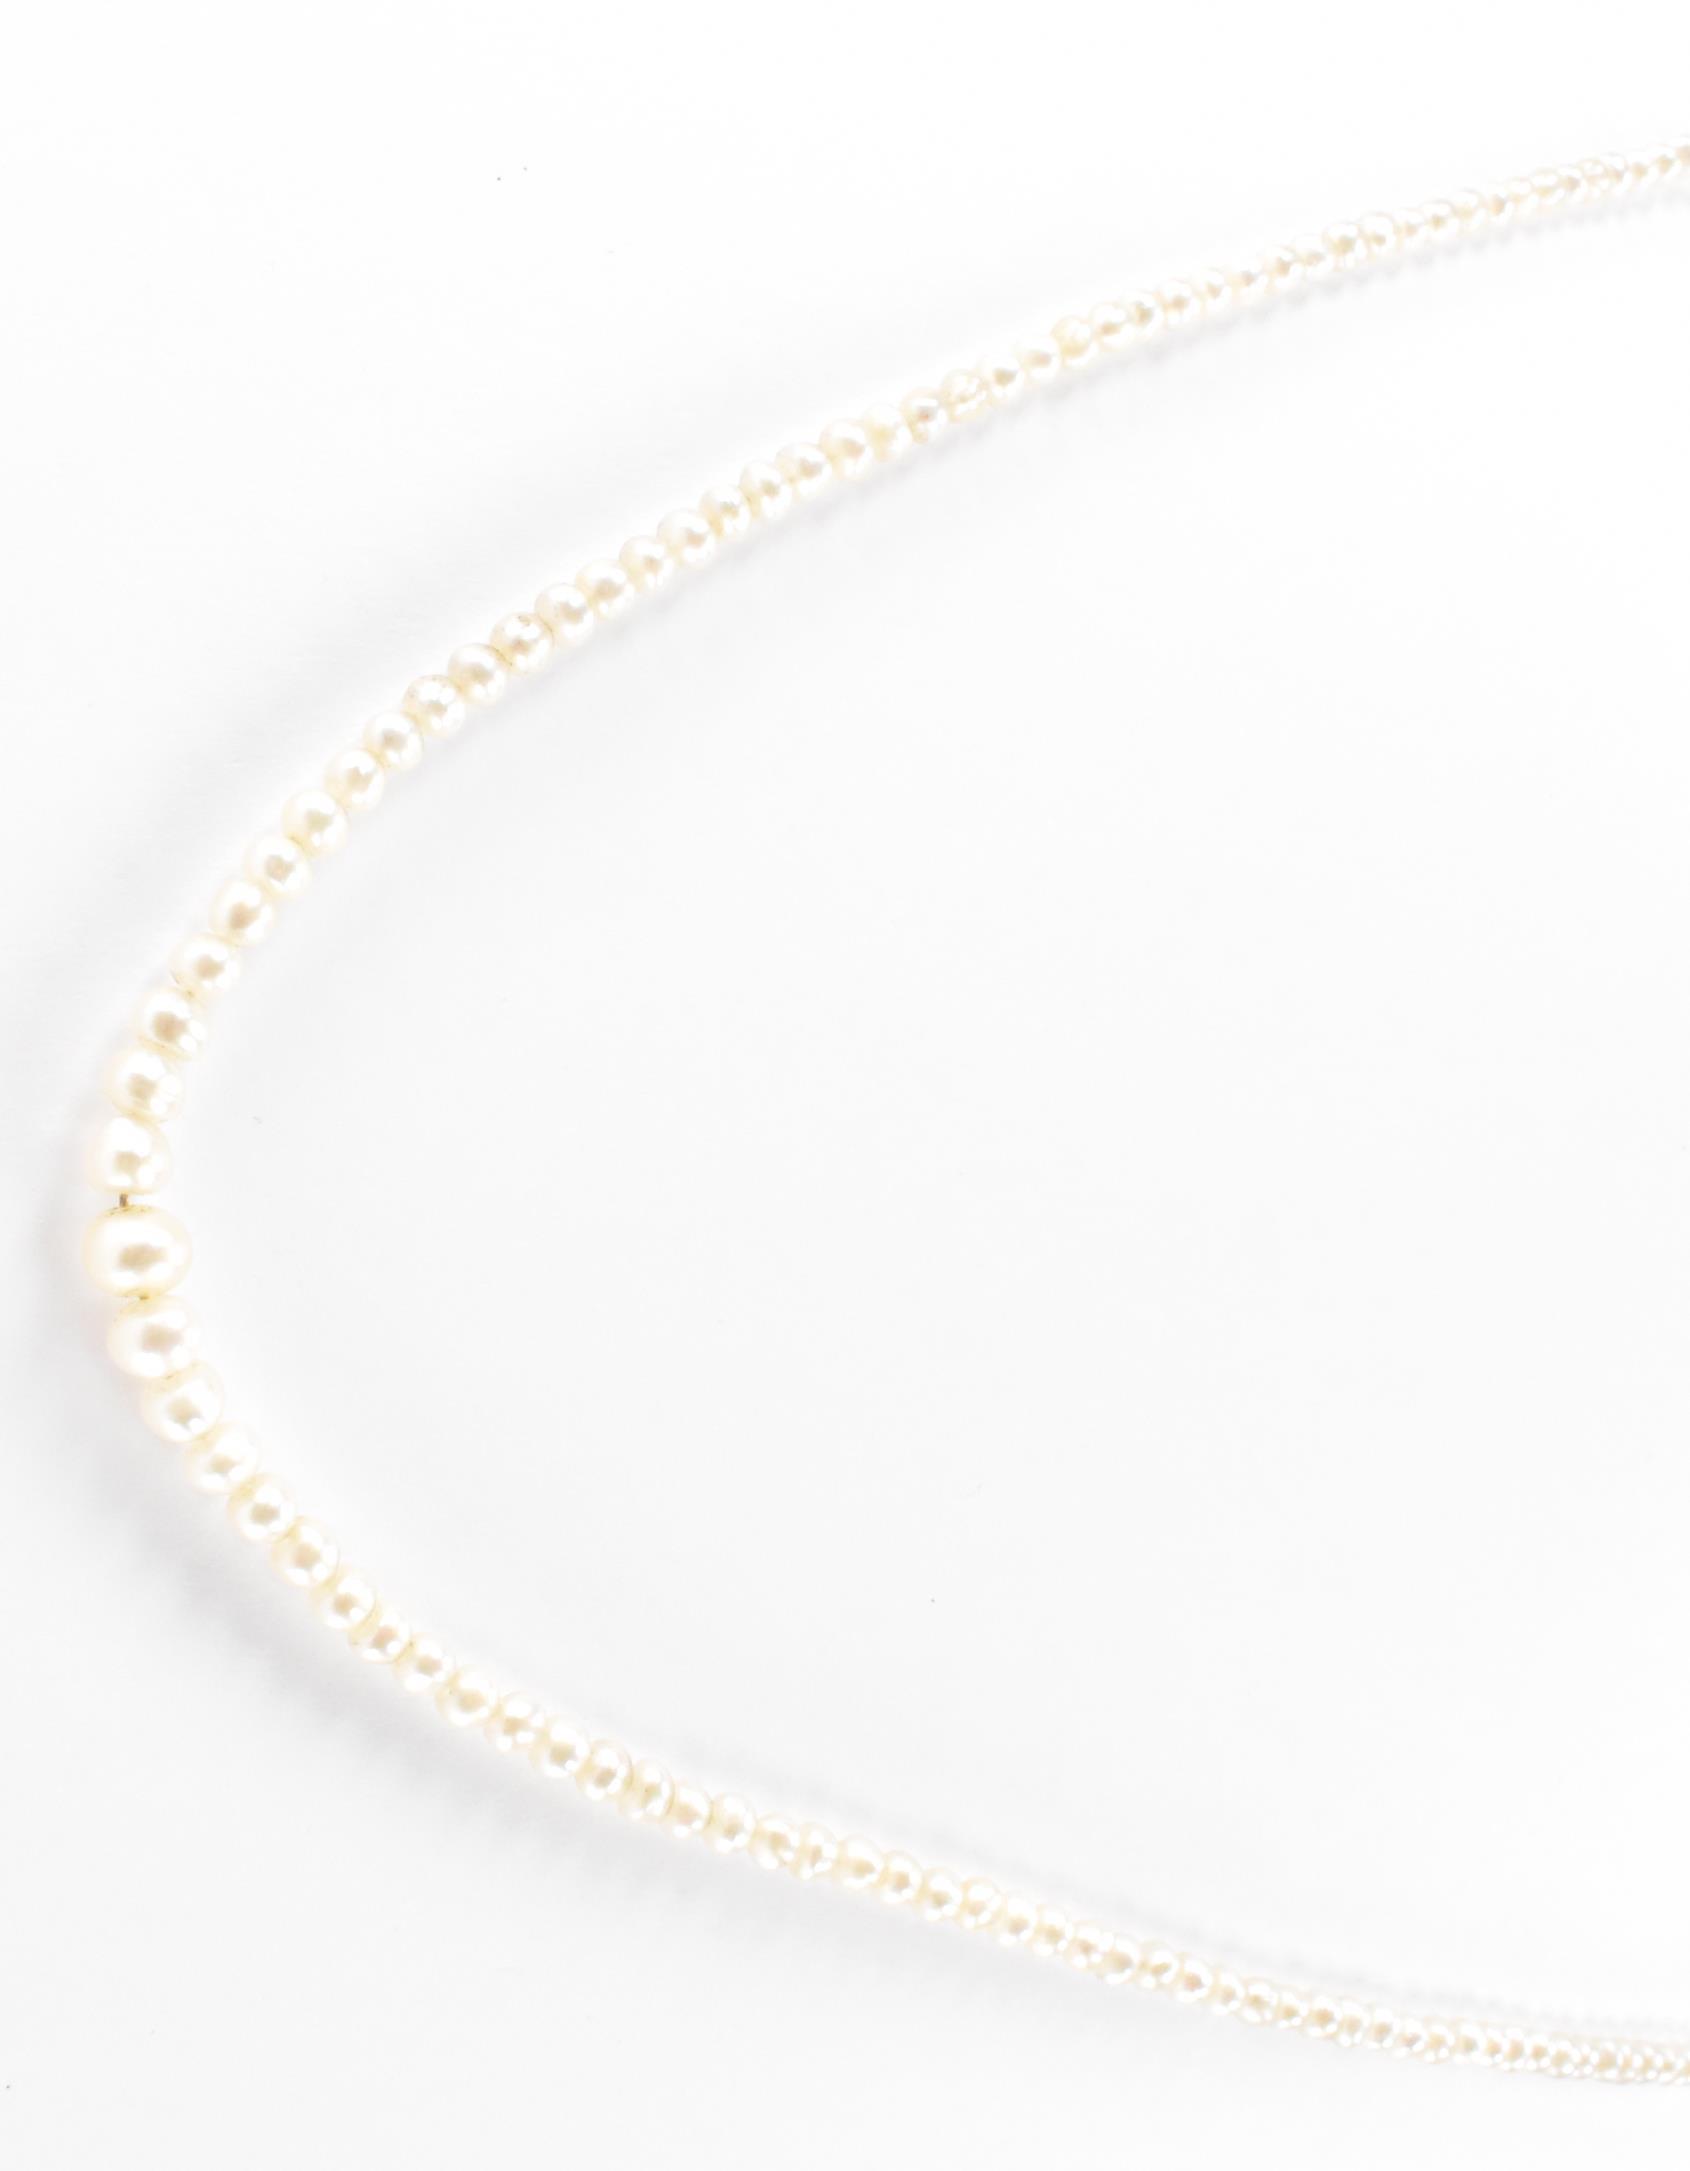 VICTORIAN PEARL & DIAMOND NECKLACE - Image 6 of 9